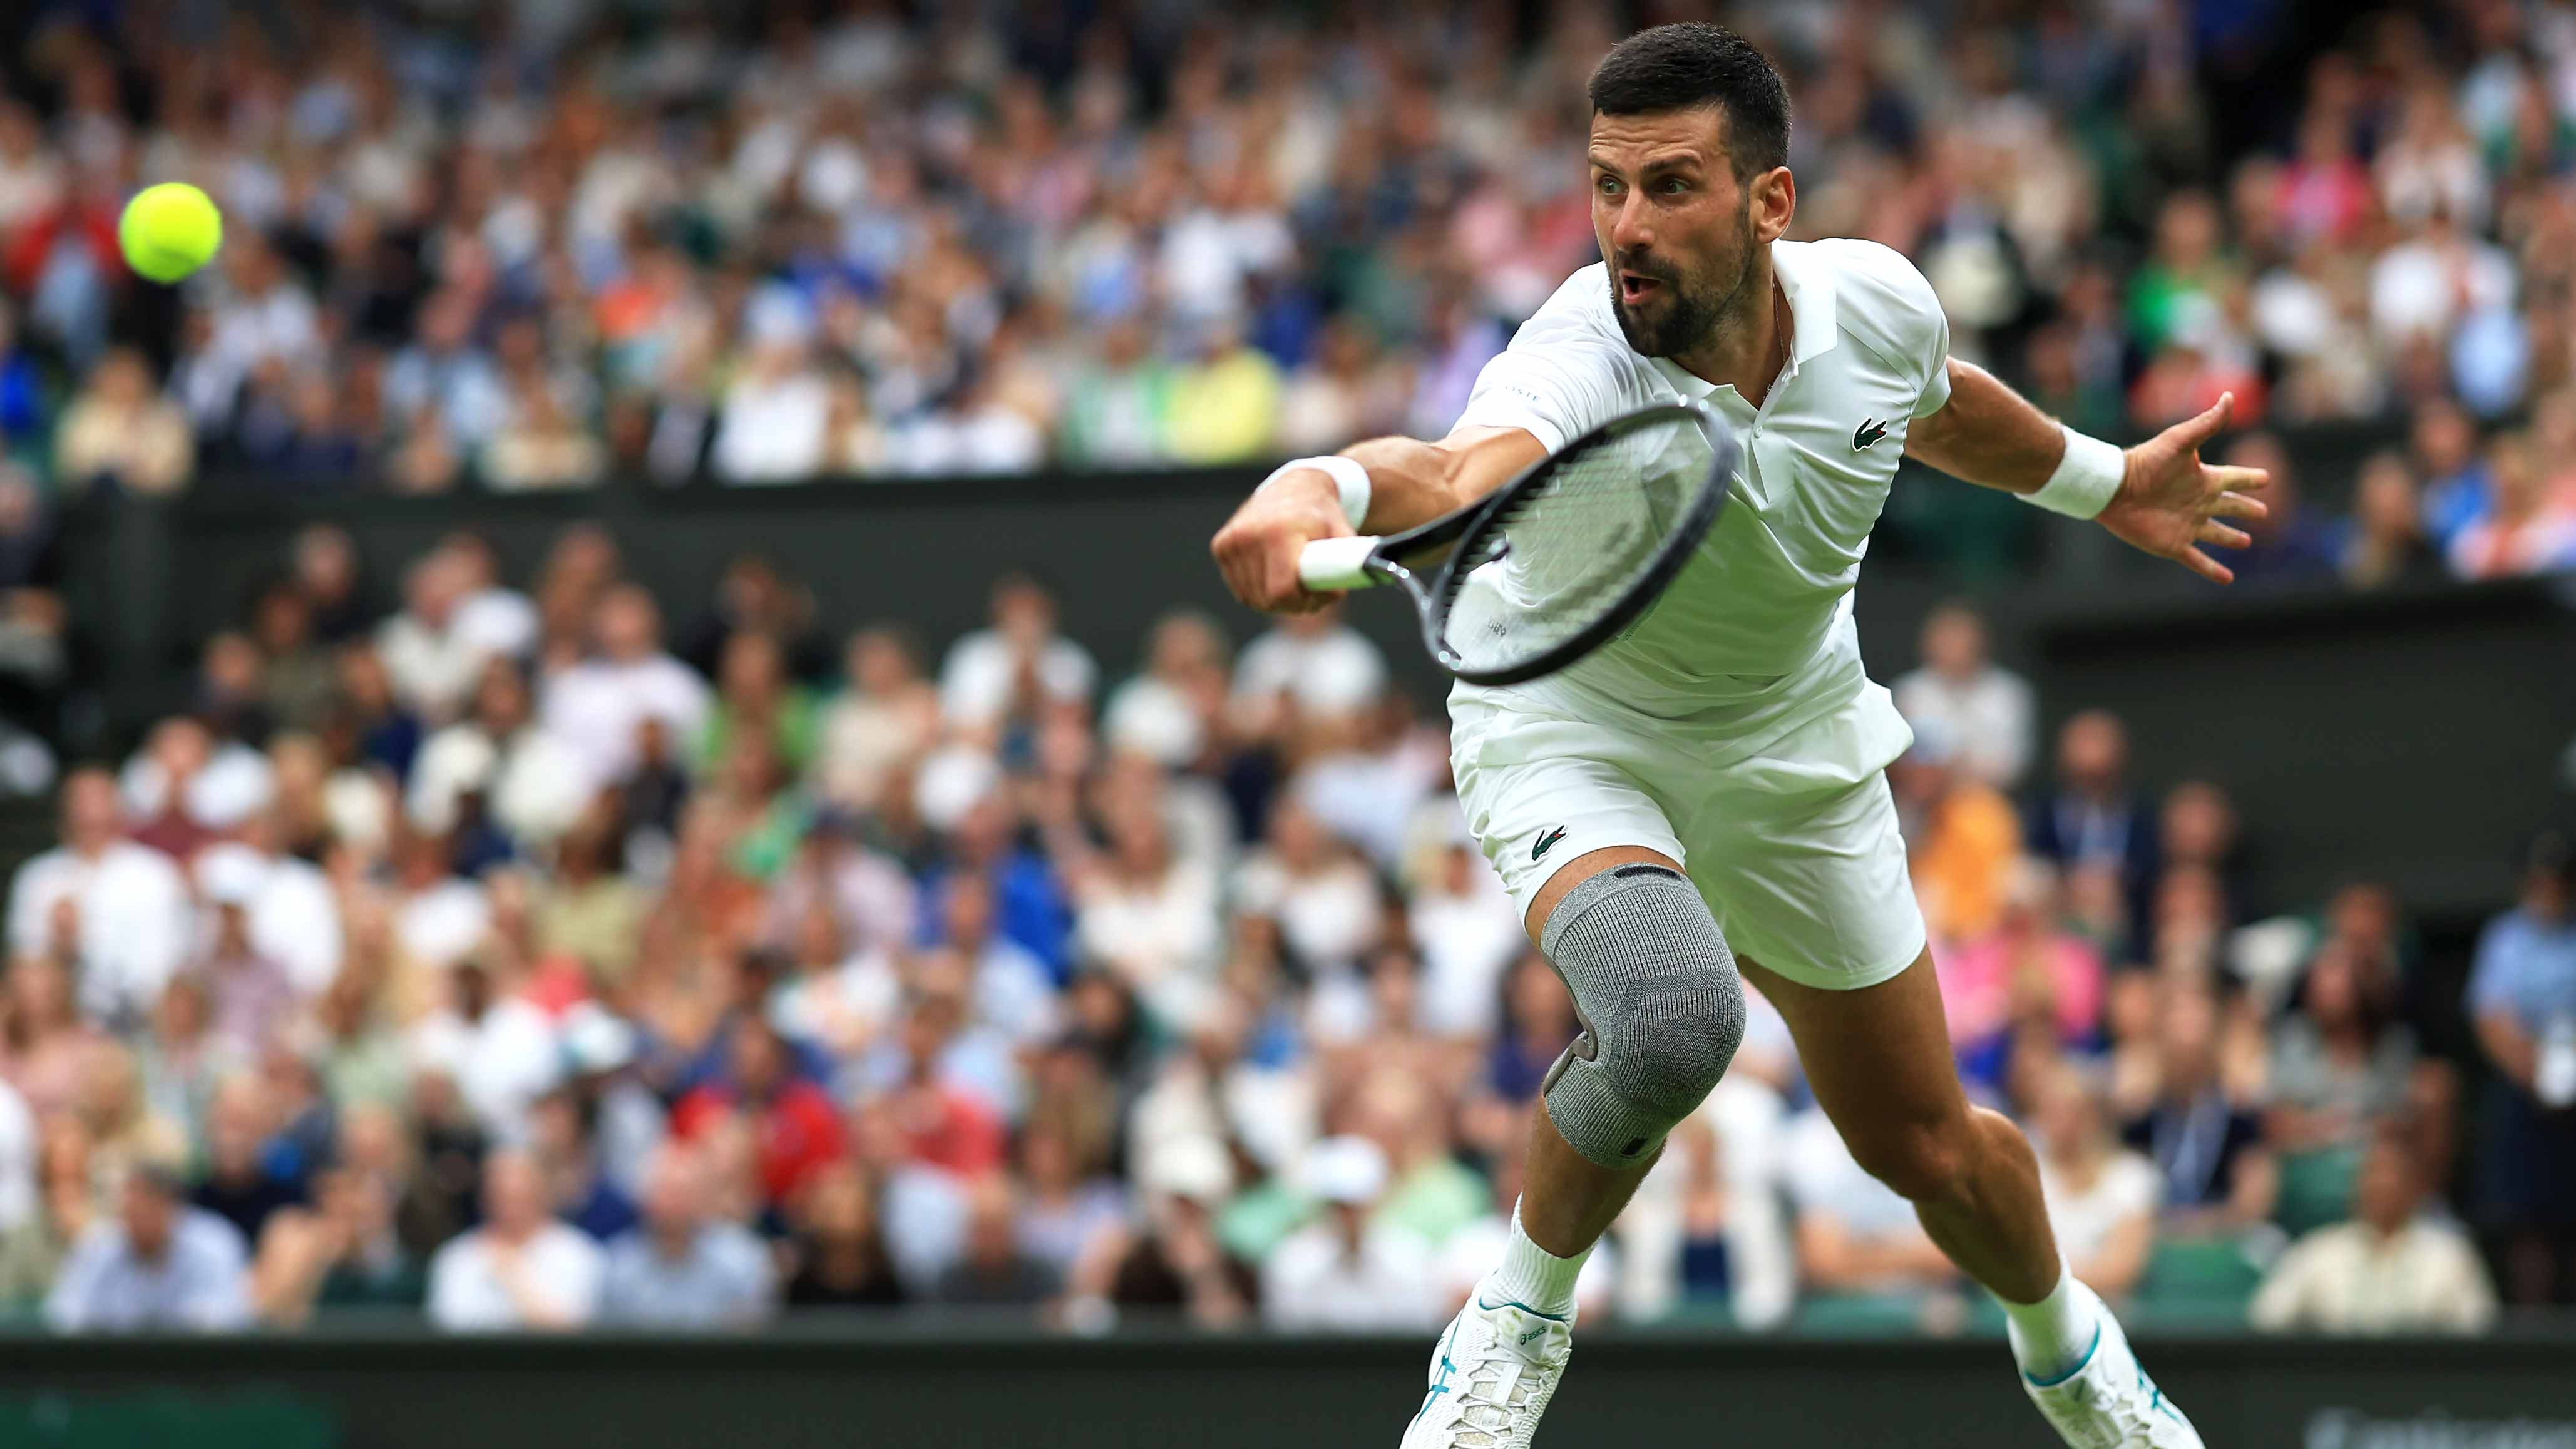 Novak Djokovic drops just five games in his first-round Wimbledon victory over Vit Kopriva Tuesday.